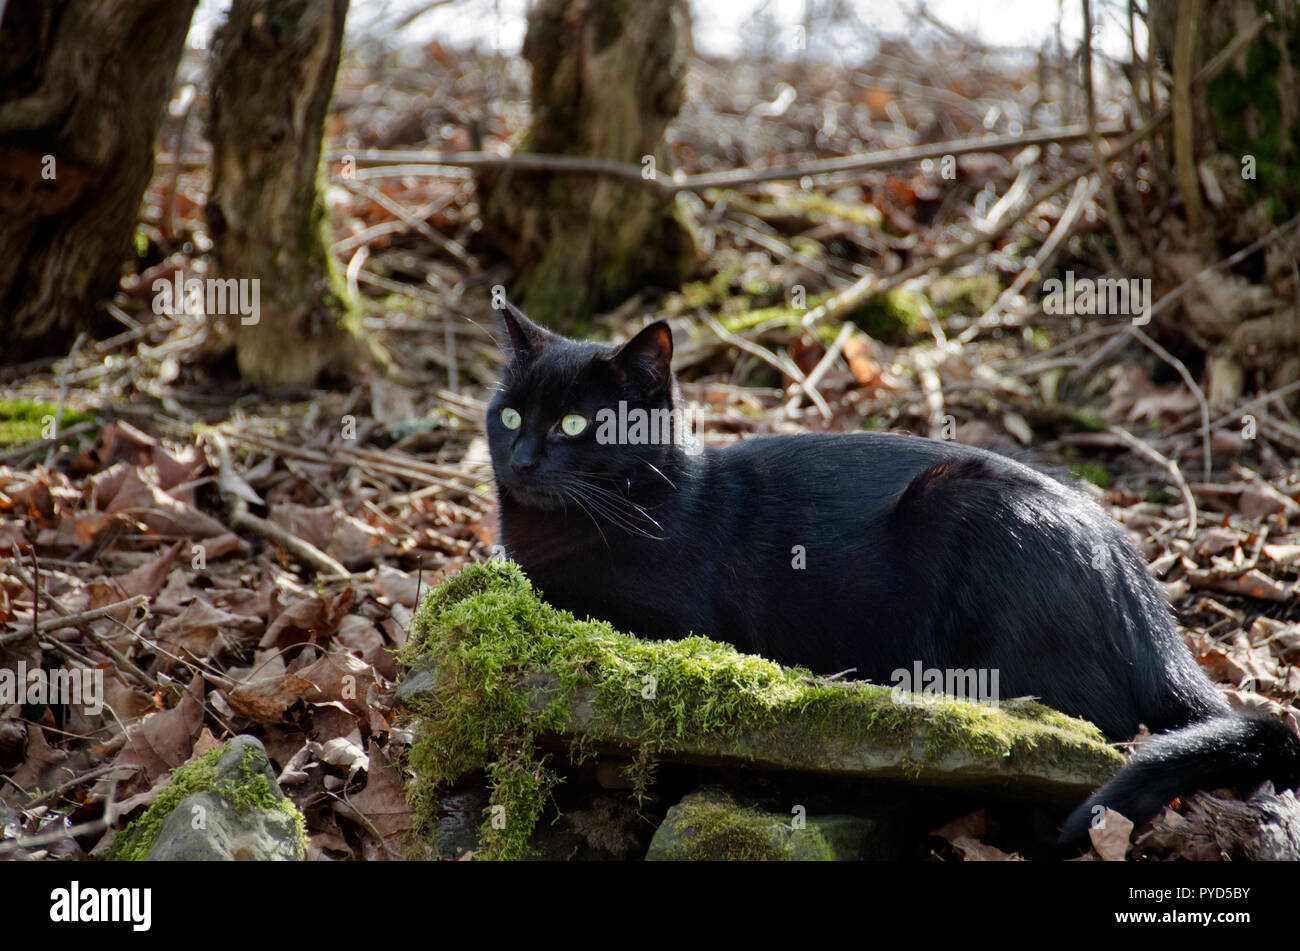 A black cat sitting on a mossy rock Stock Photo